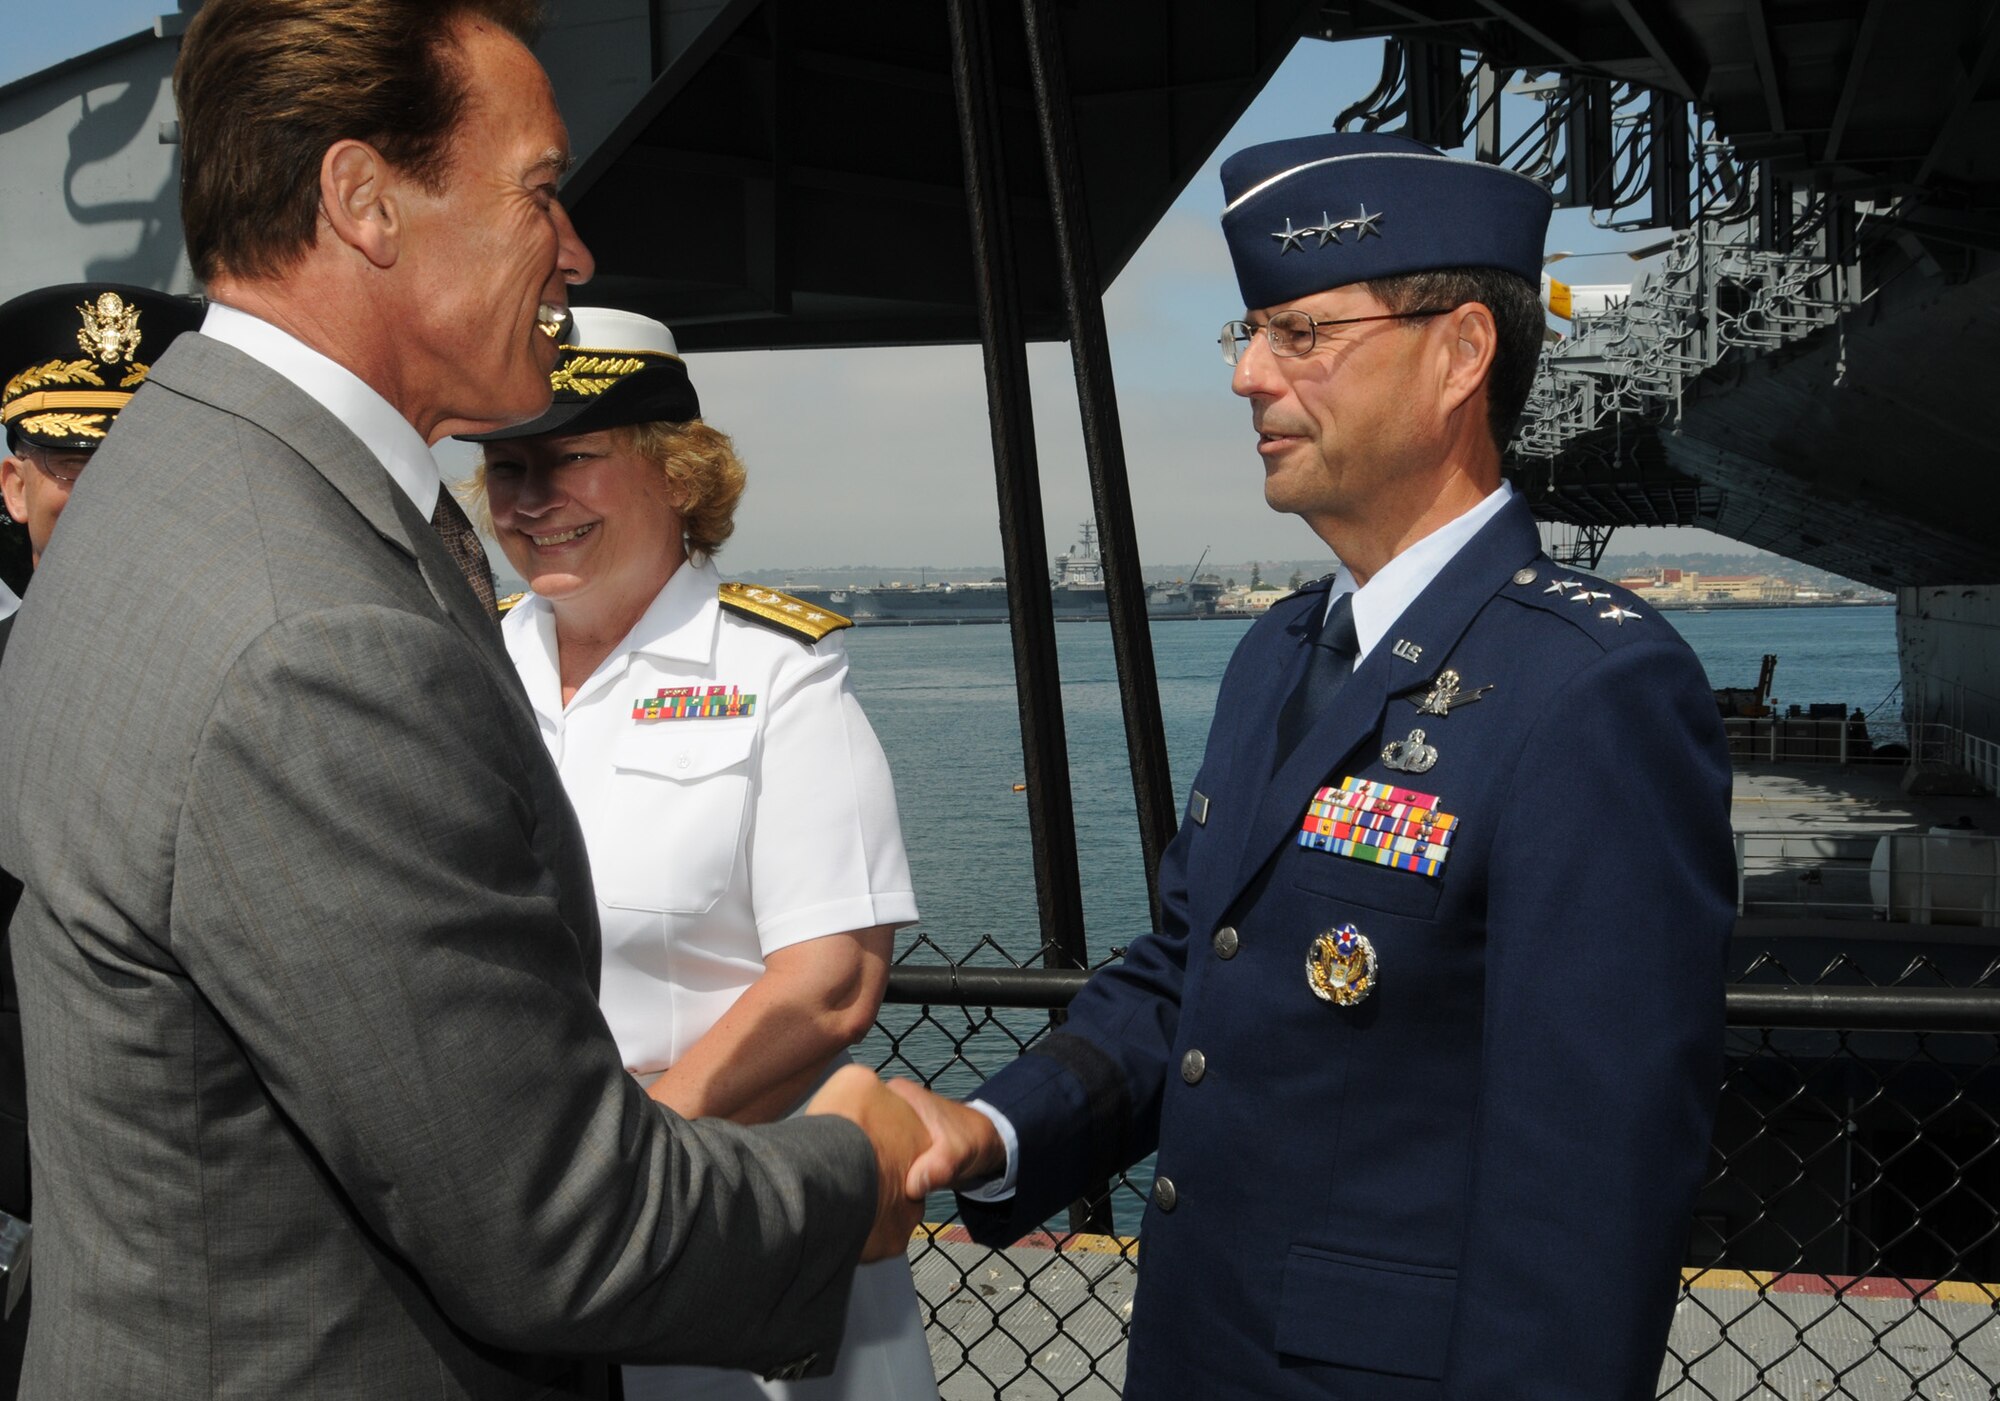 Lt. Gen. John “Tom” Sheridan, Space and Missile Systems Center commander, shakes hands with California Governor Arnold Schwarzenegger at the Operation Welcome Home kick-off, aboard the U.S.S. Midway in San Diego, June 3.   The first of its kind  in the nation, Operation Welcome Home is a statewide campaign to connect with returning veterans to determine their needs and connect them with the services that can help them transition successfully from the battle front to the home front.   (Photo by Joe Juarez)  